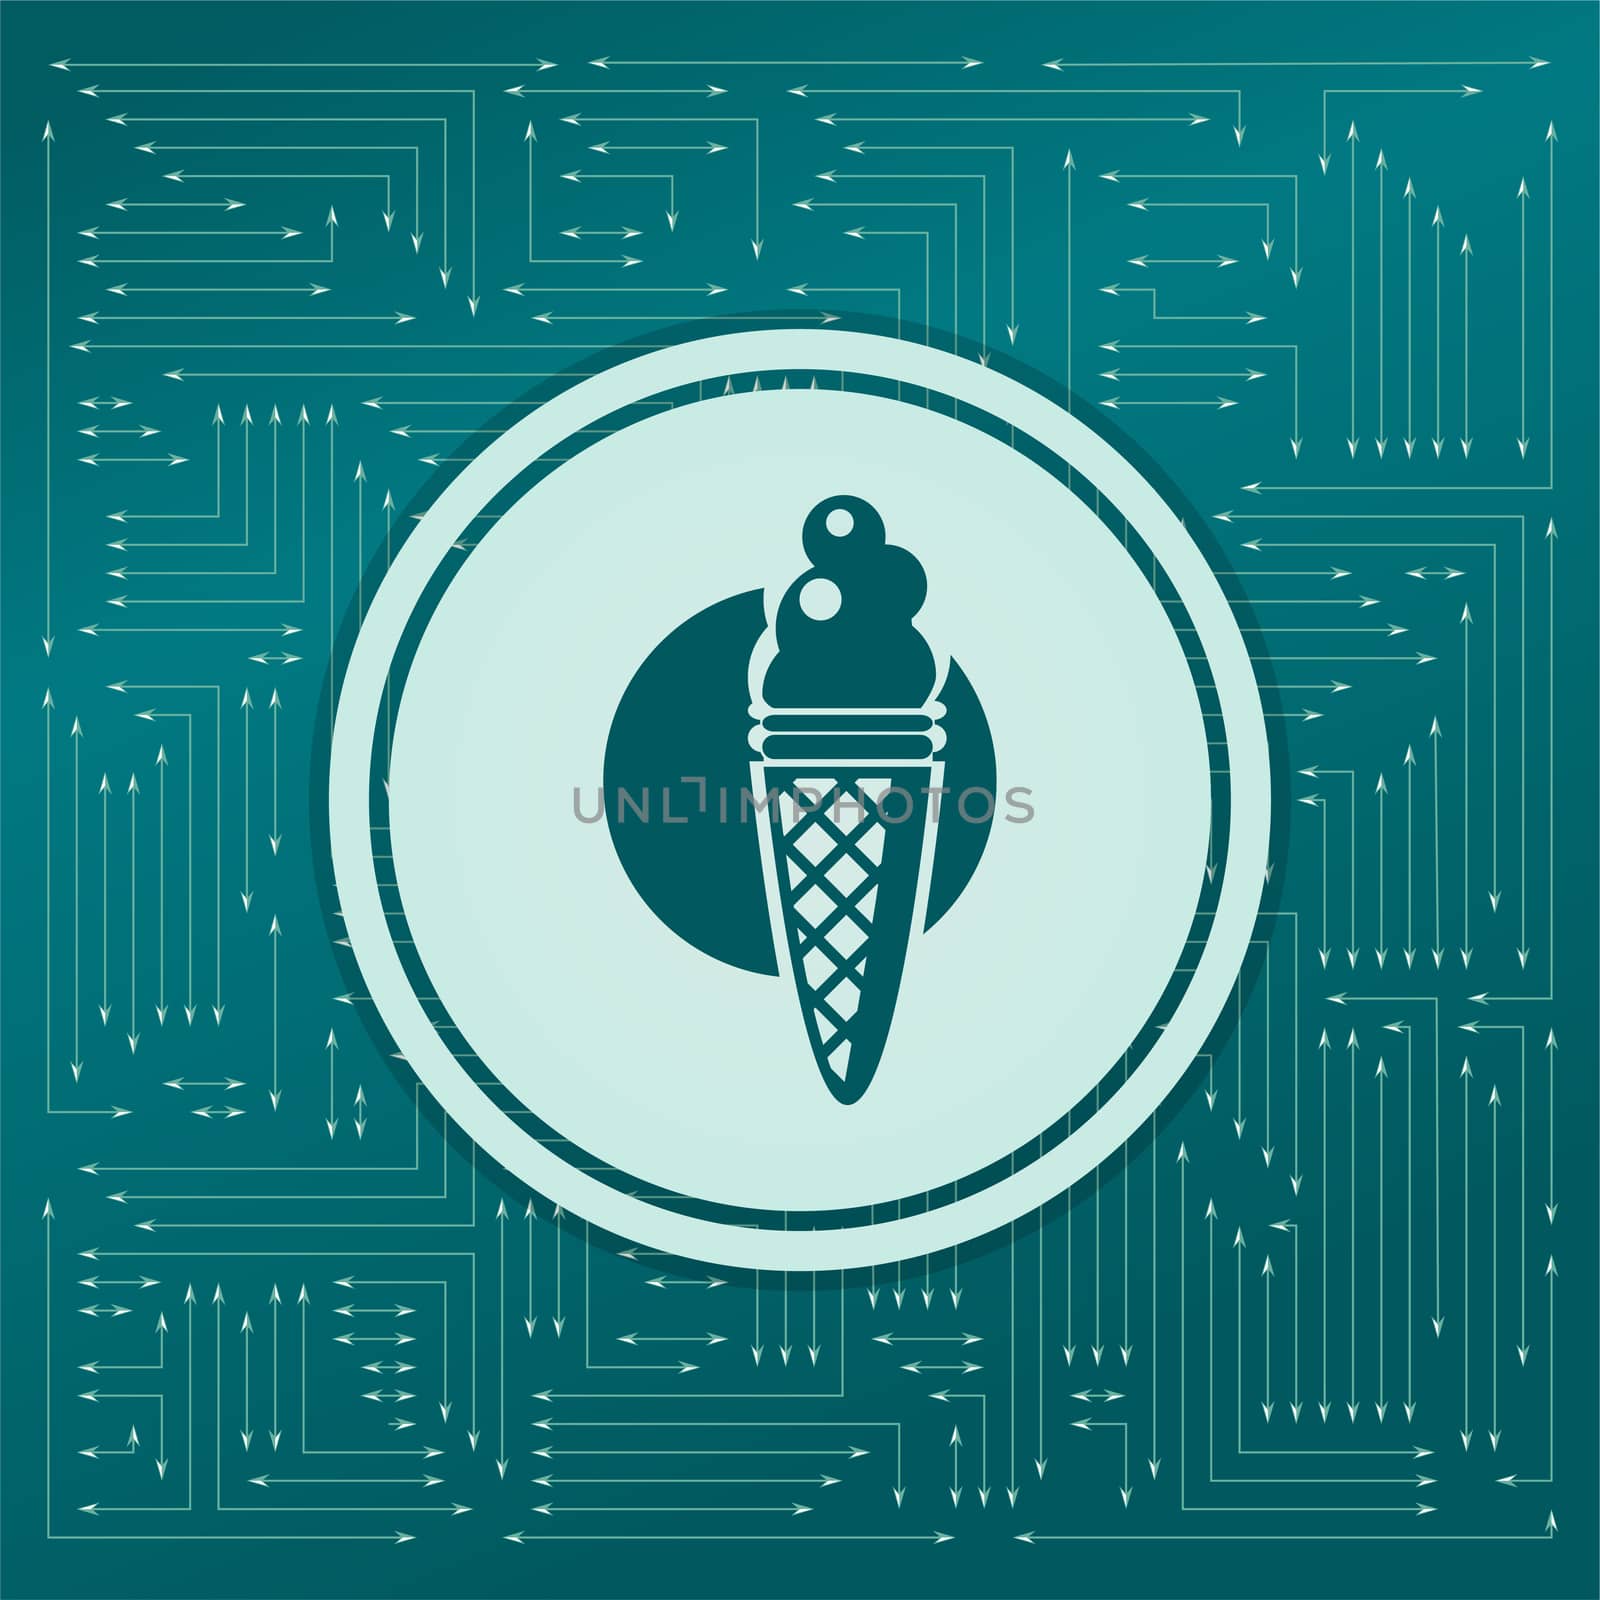 Ice Cream icon on a green background, with arrows in different directions. It appears on the electronic board. illustration